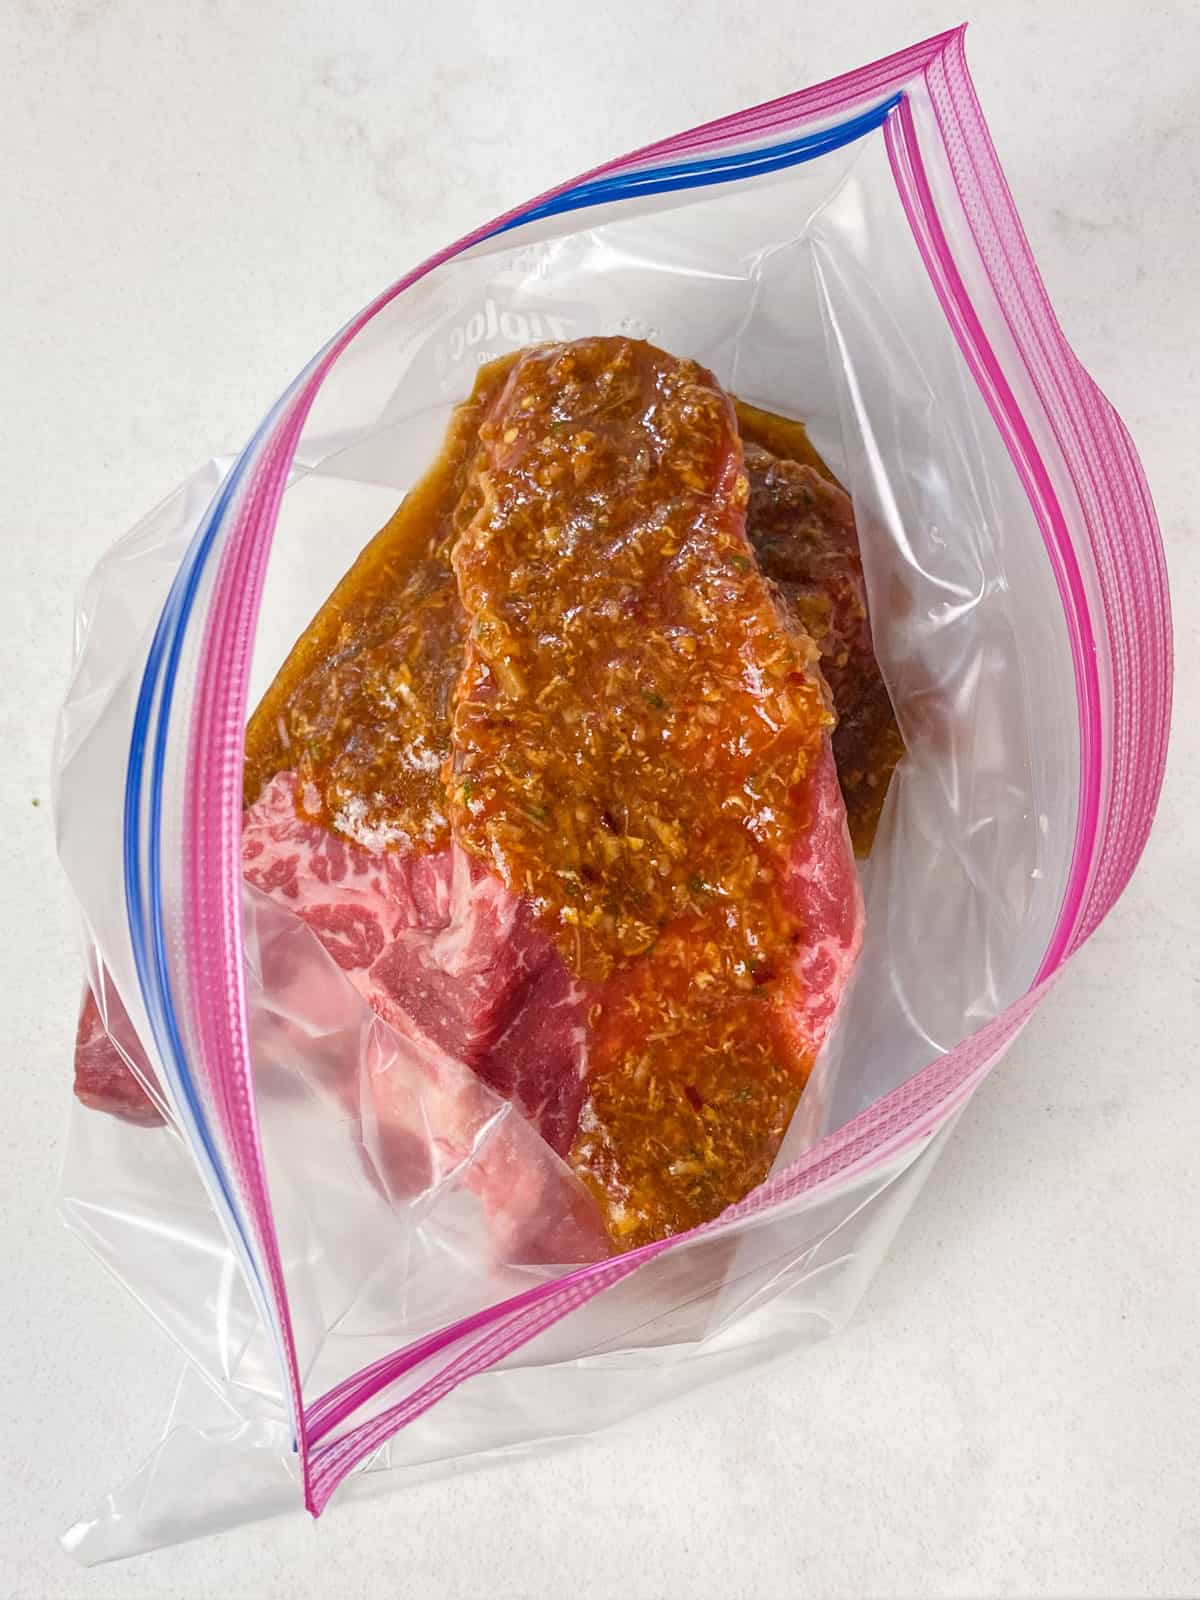 Pour the sweet chili marinade over the steak in a resealable plastic bag.